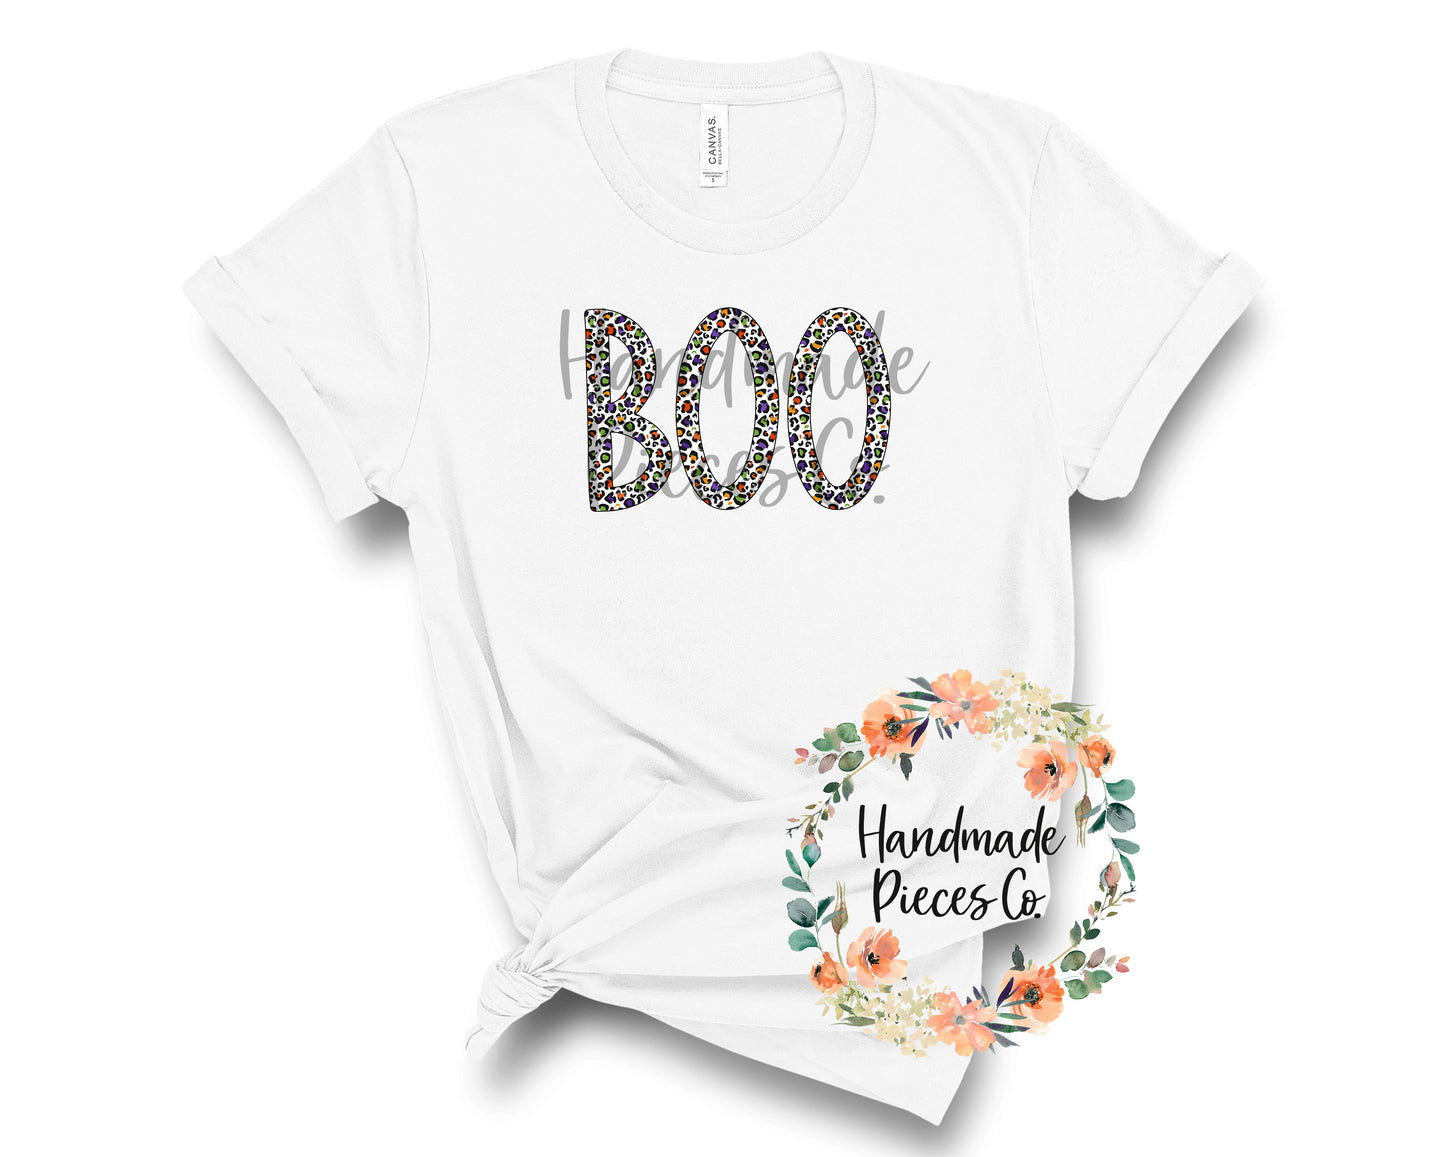 Boo, Halloween Leopard - Sublimation or HTV Transfer